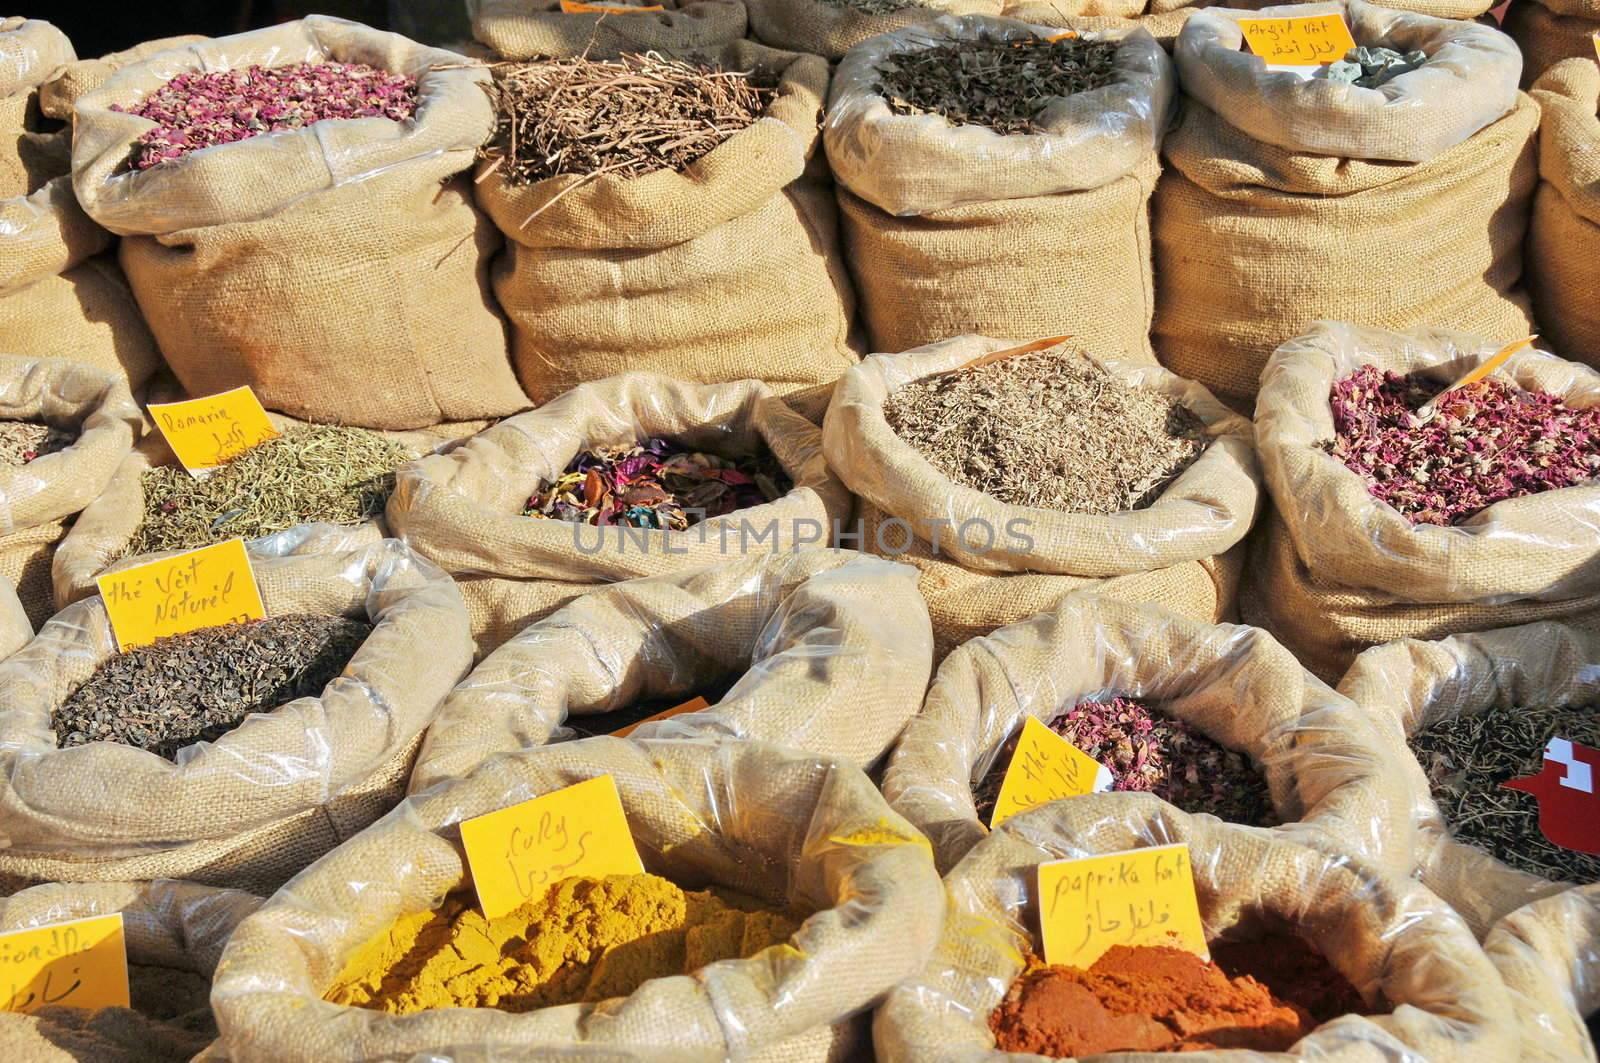 Tea and spices in a Tunisian market